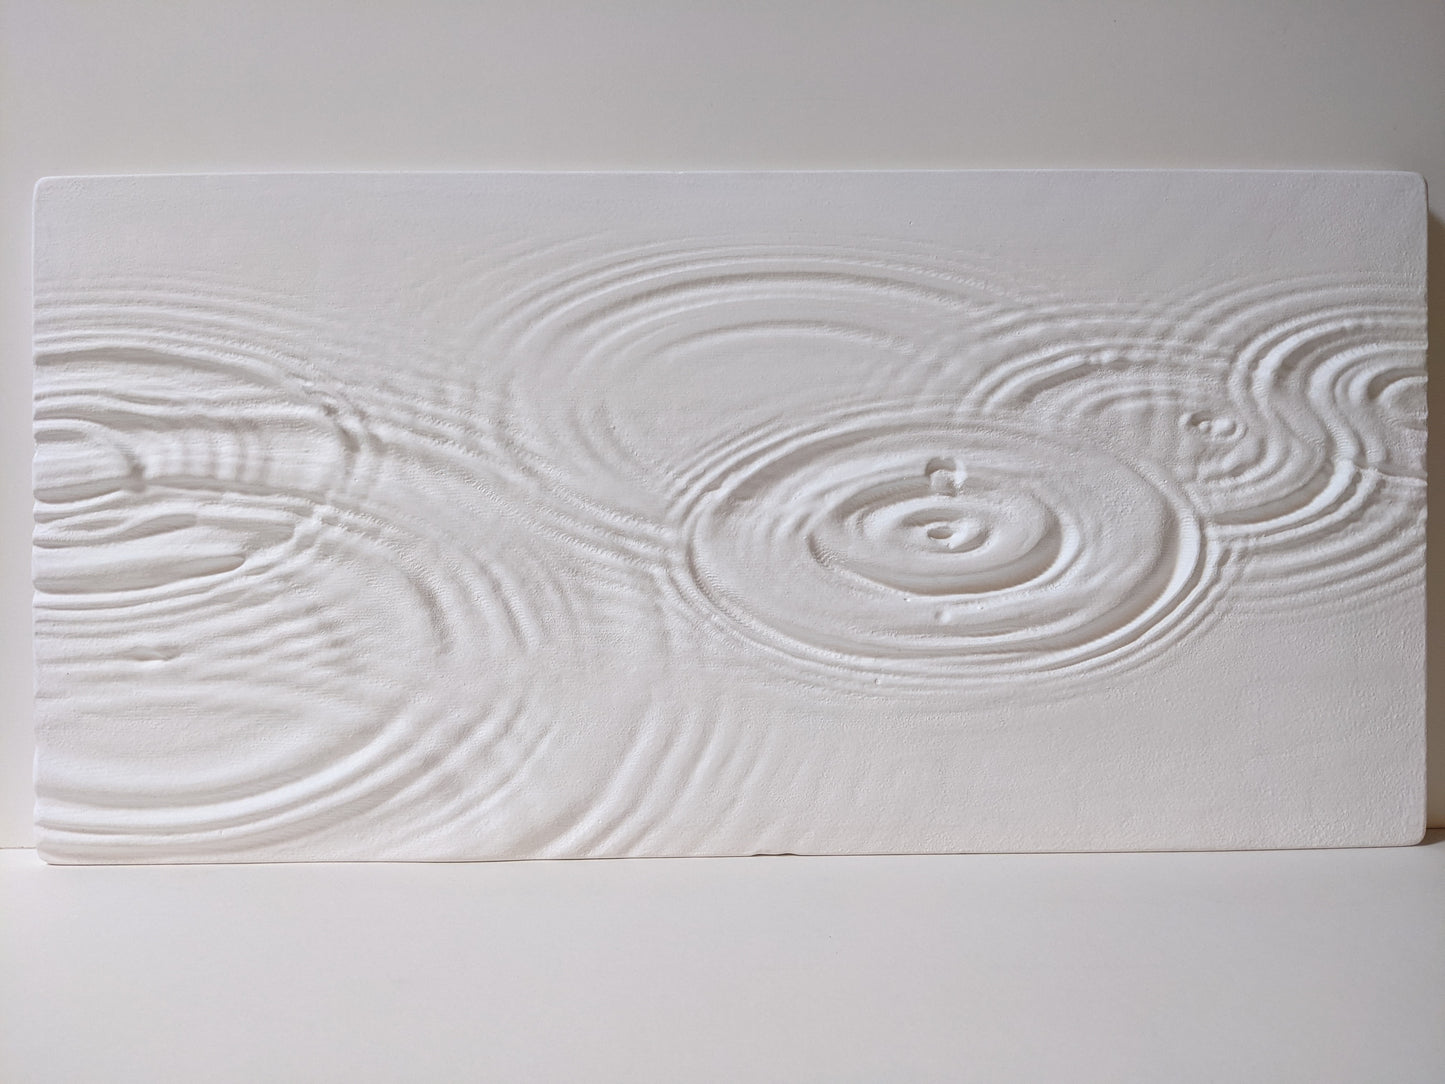 Calm - Ripples on Water Bas Relief Sculpture